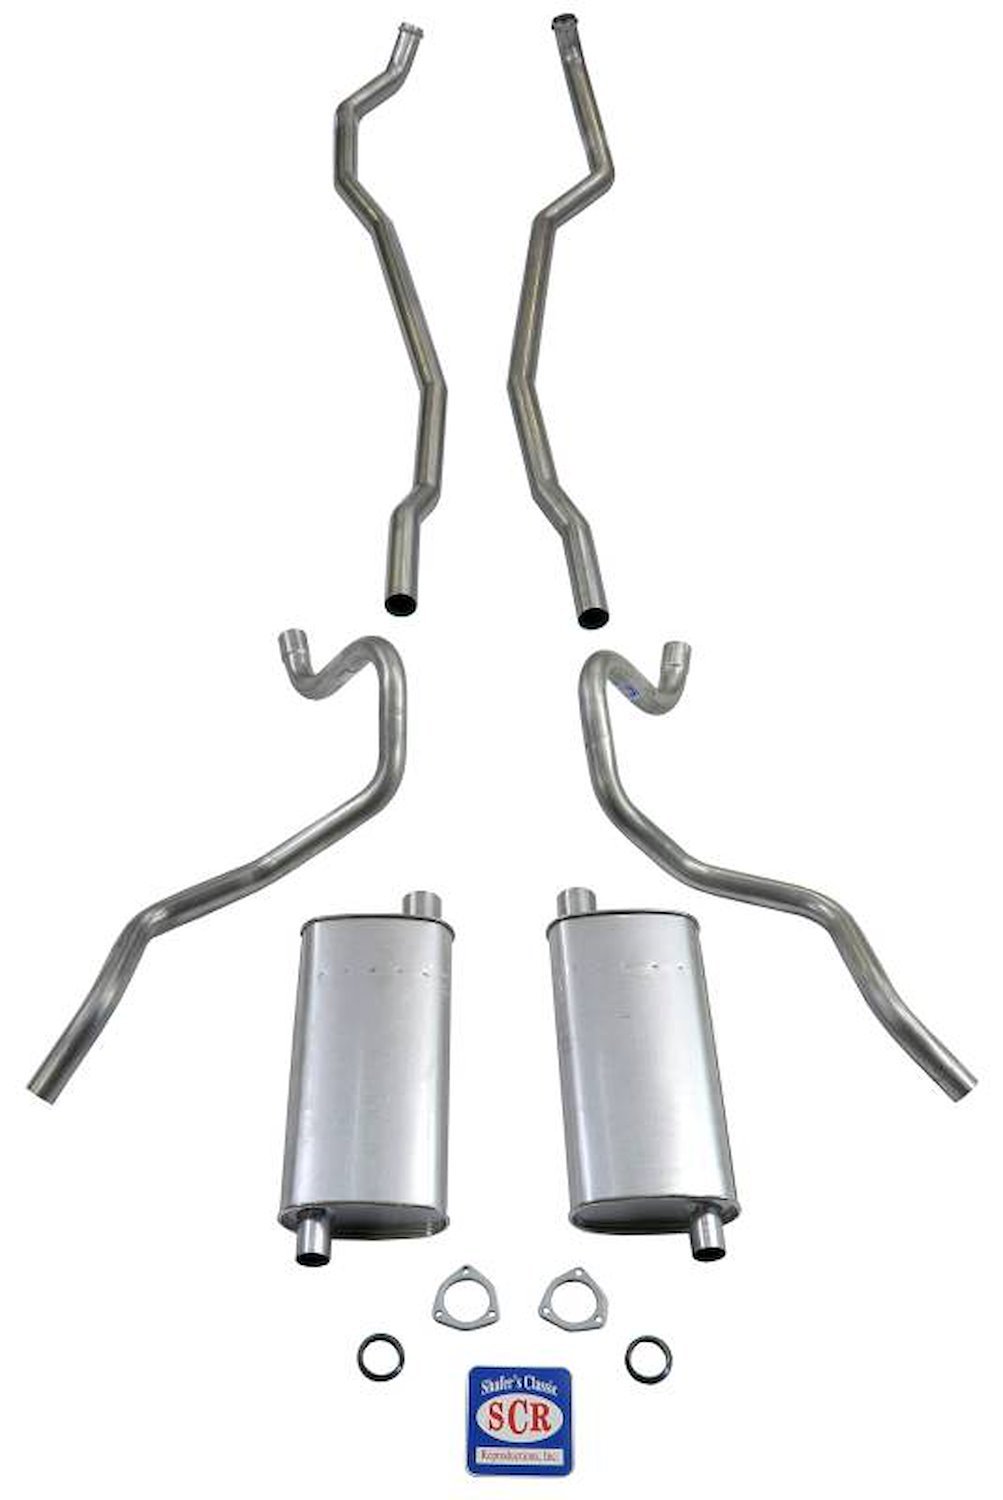 73065S 1965-66 Chevrolet Exhaust System 8-cyl 396 & 427 Dual Exhaust w/ 2-1/2 in. Exhaust Pipes, 304 Stainless Steel